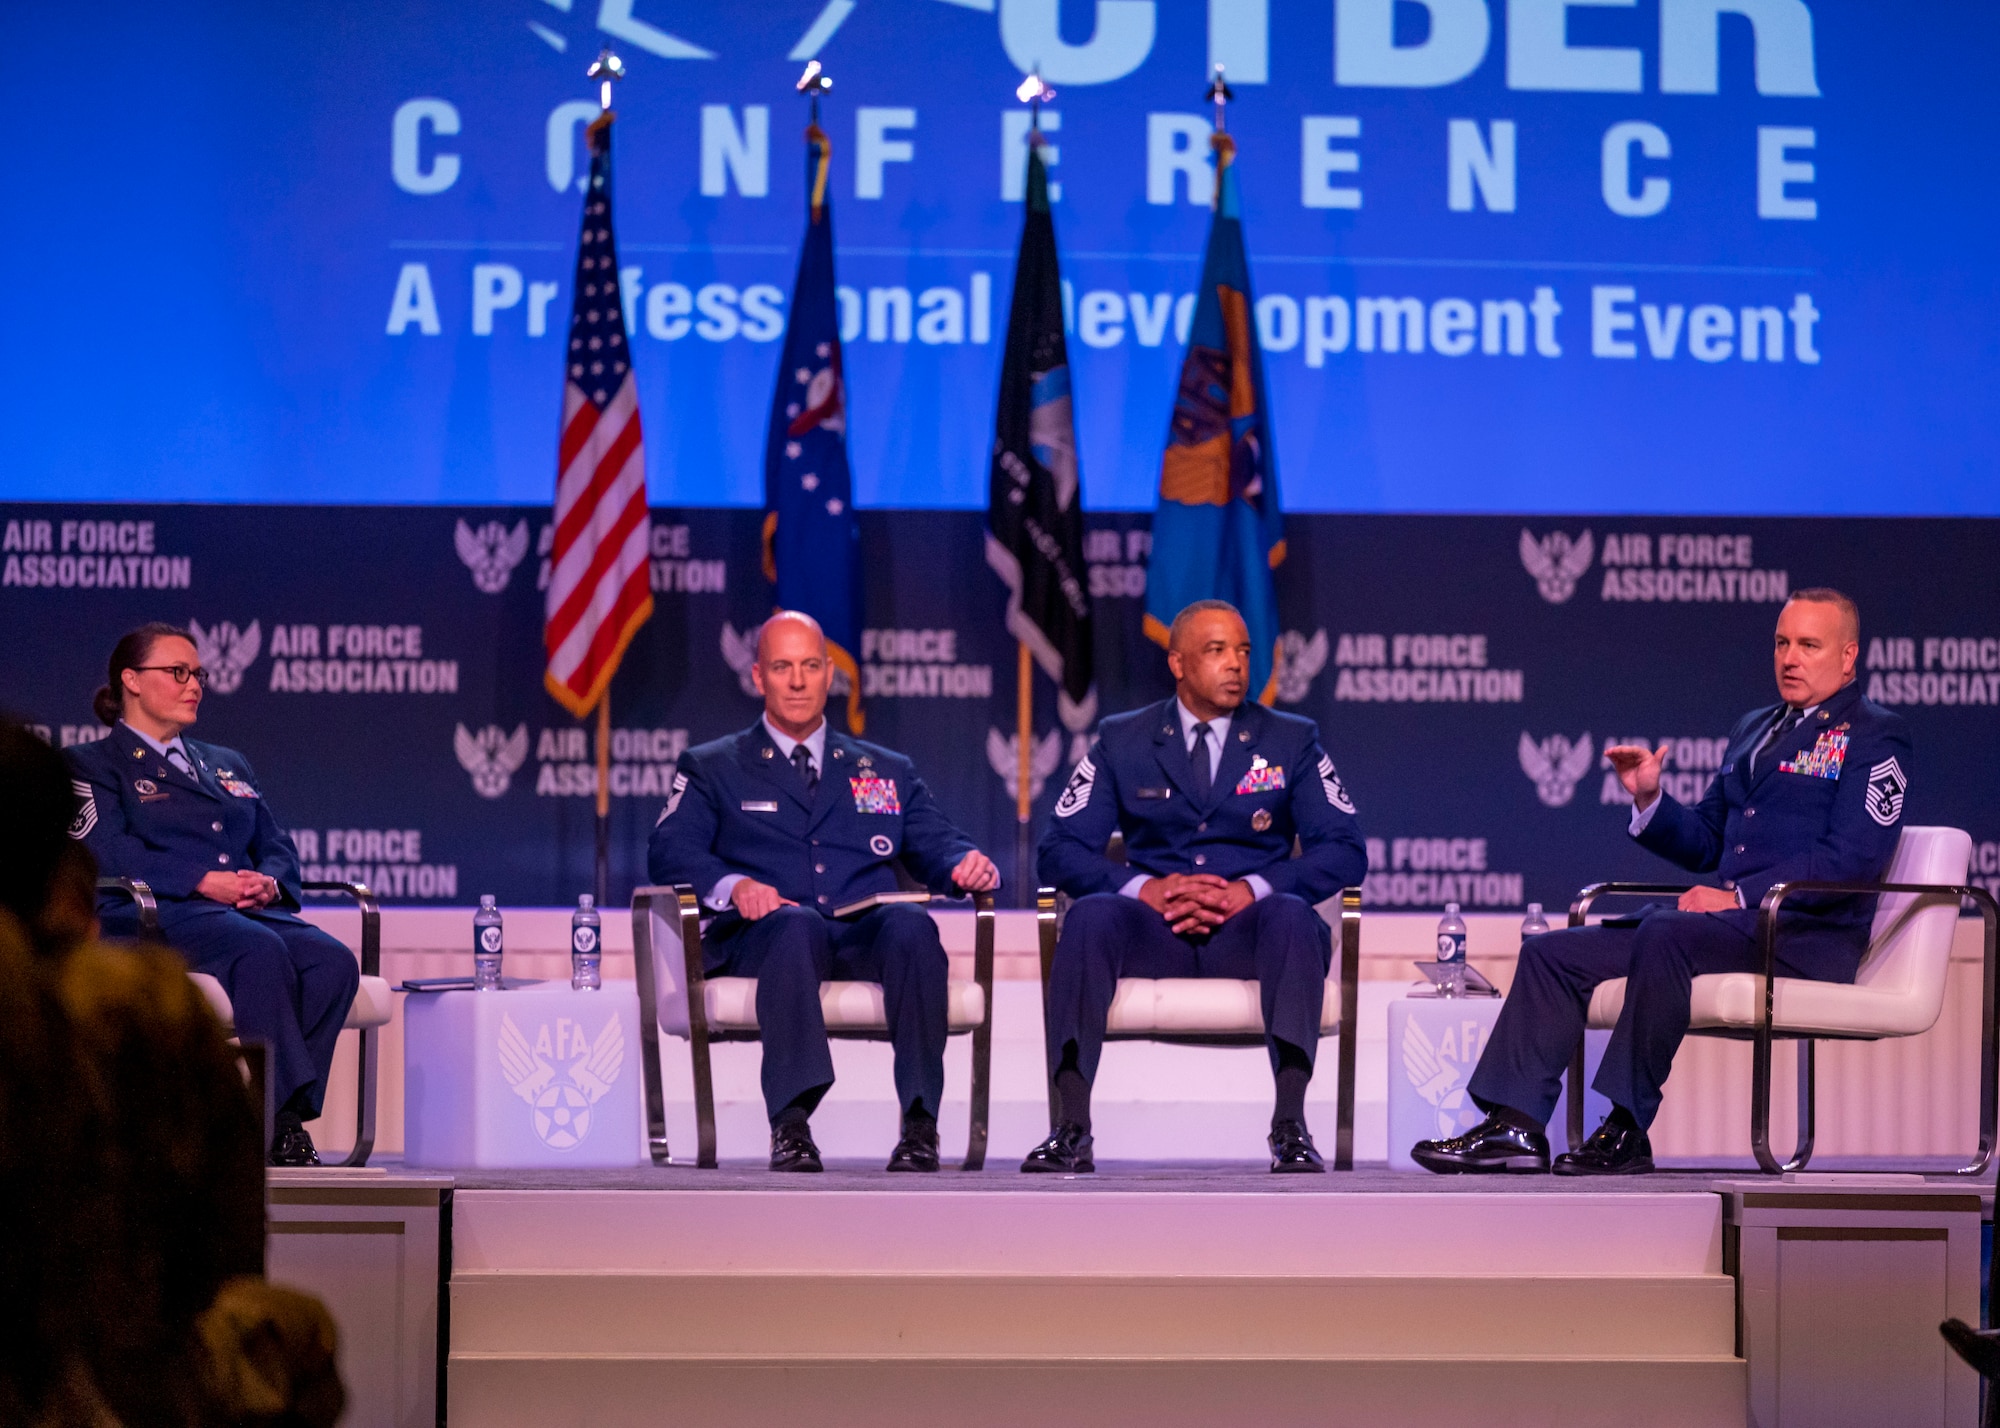 Photo of chief master sergeants speaking during a panel.